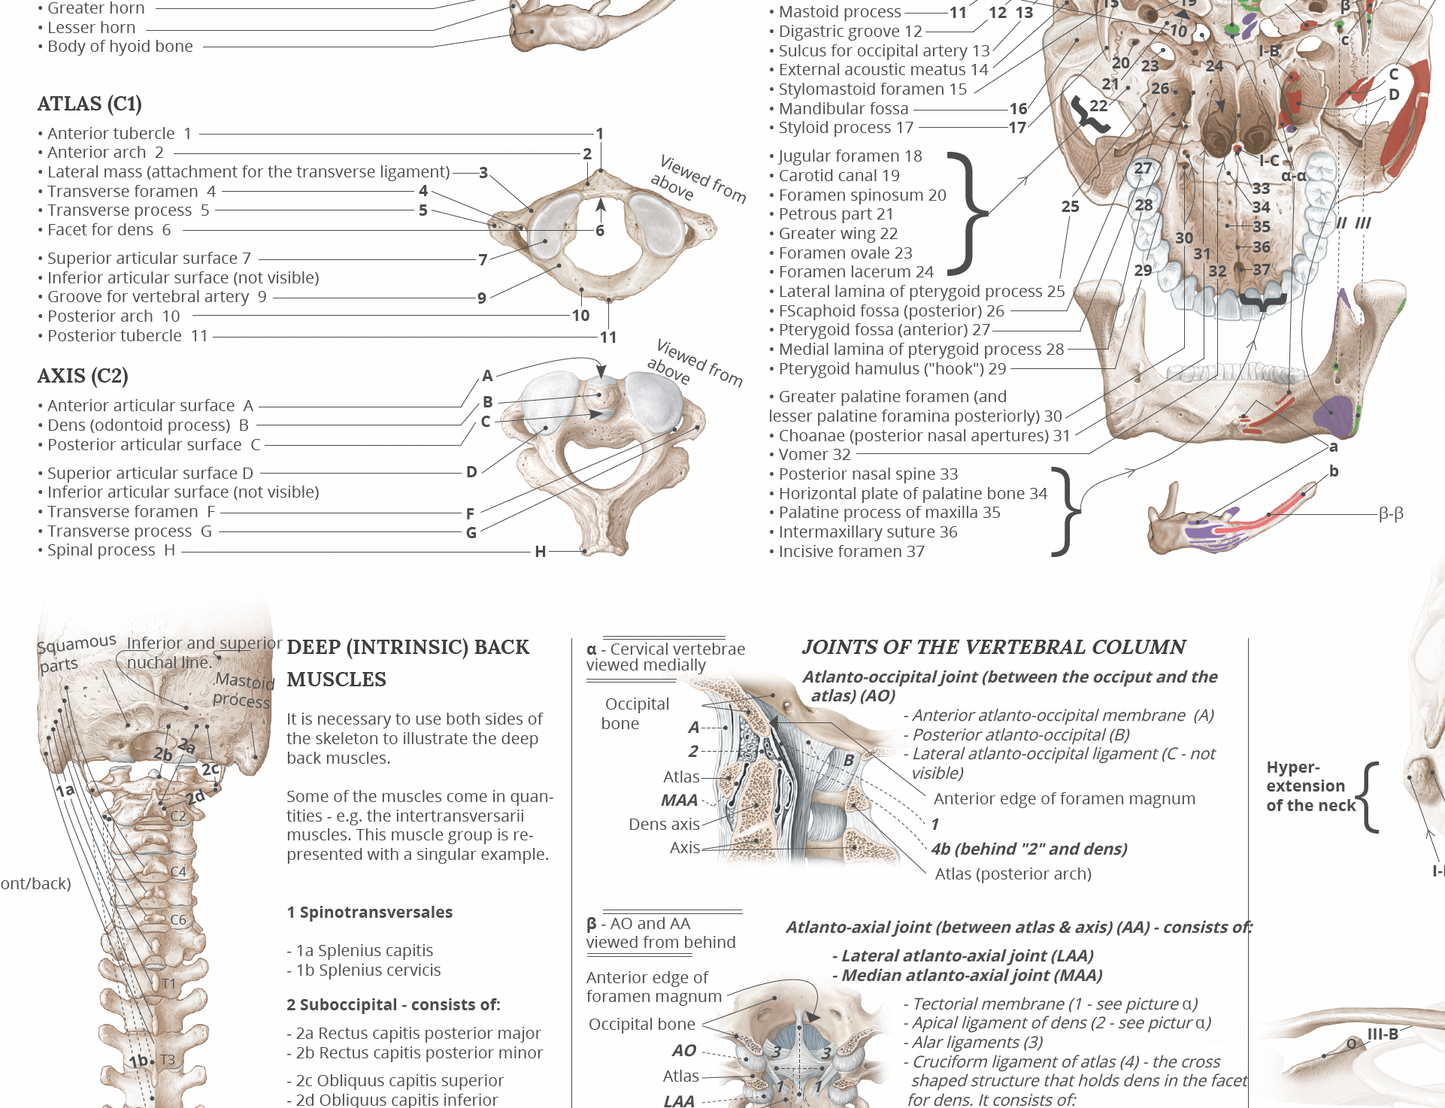 Anatomy poster - Anatomy of the musculoskeletal system EA1